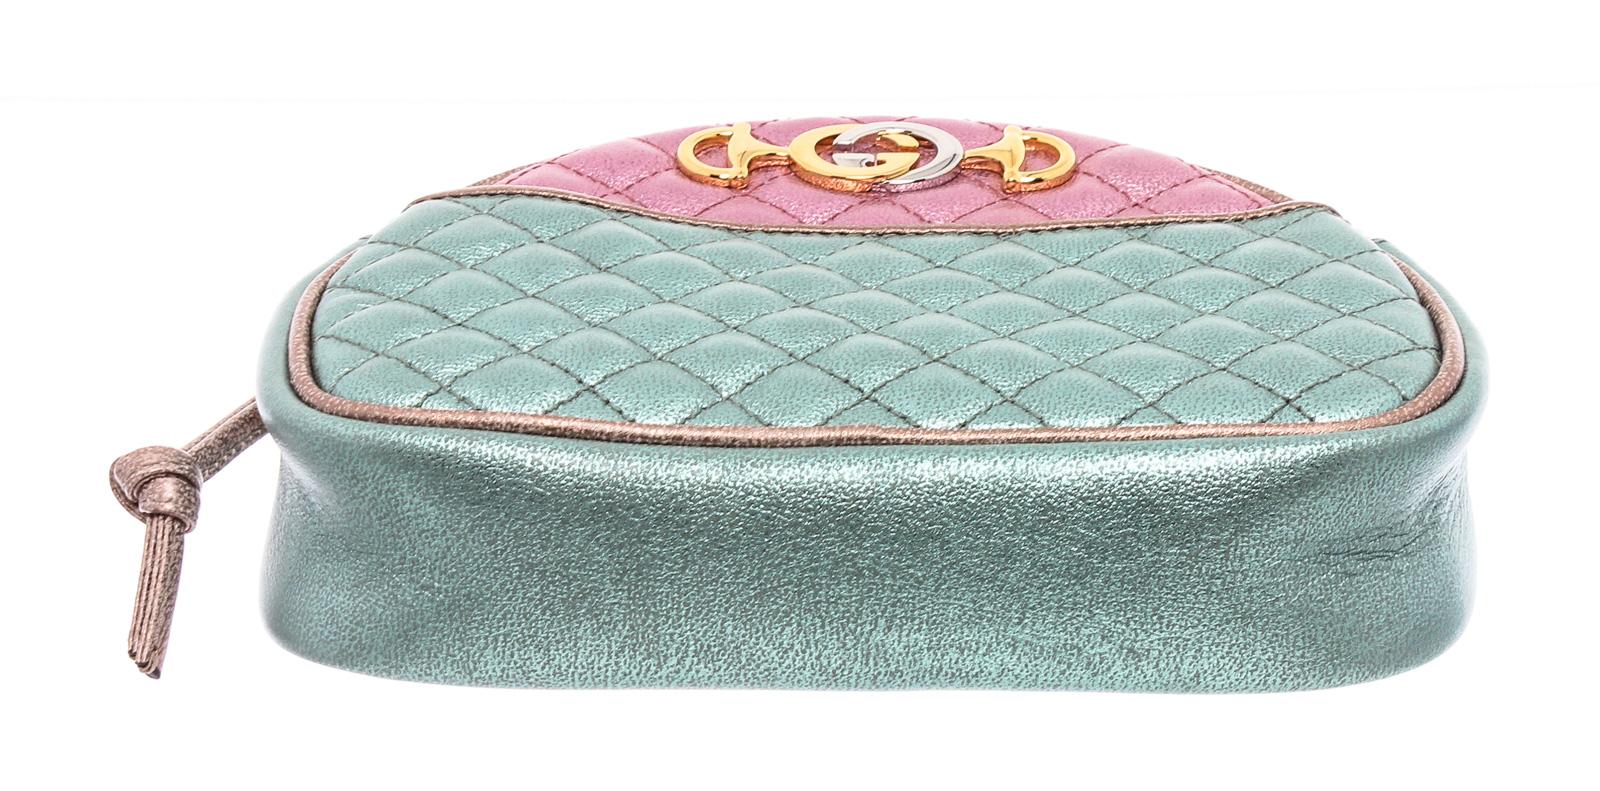 Gucci Mini Trapuntata crossbody bag crafted of textured calfskin leather in laminated pink and blue. The shoulder bag features a waist length braided shoulder strap and has combined its horse bit and interlocked G insignias in gold and silver tone